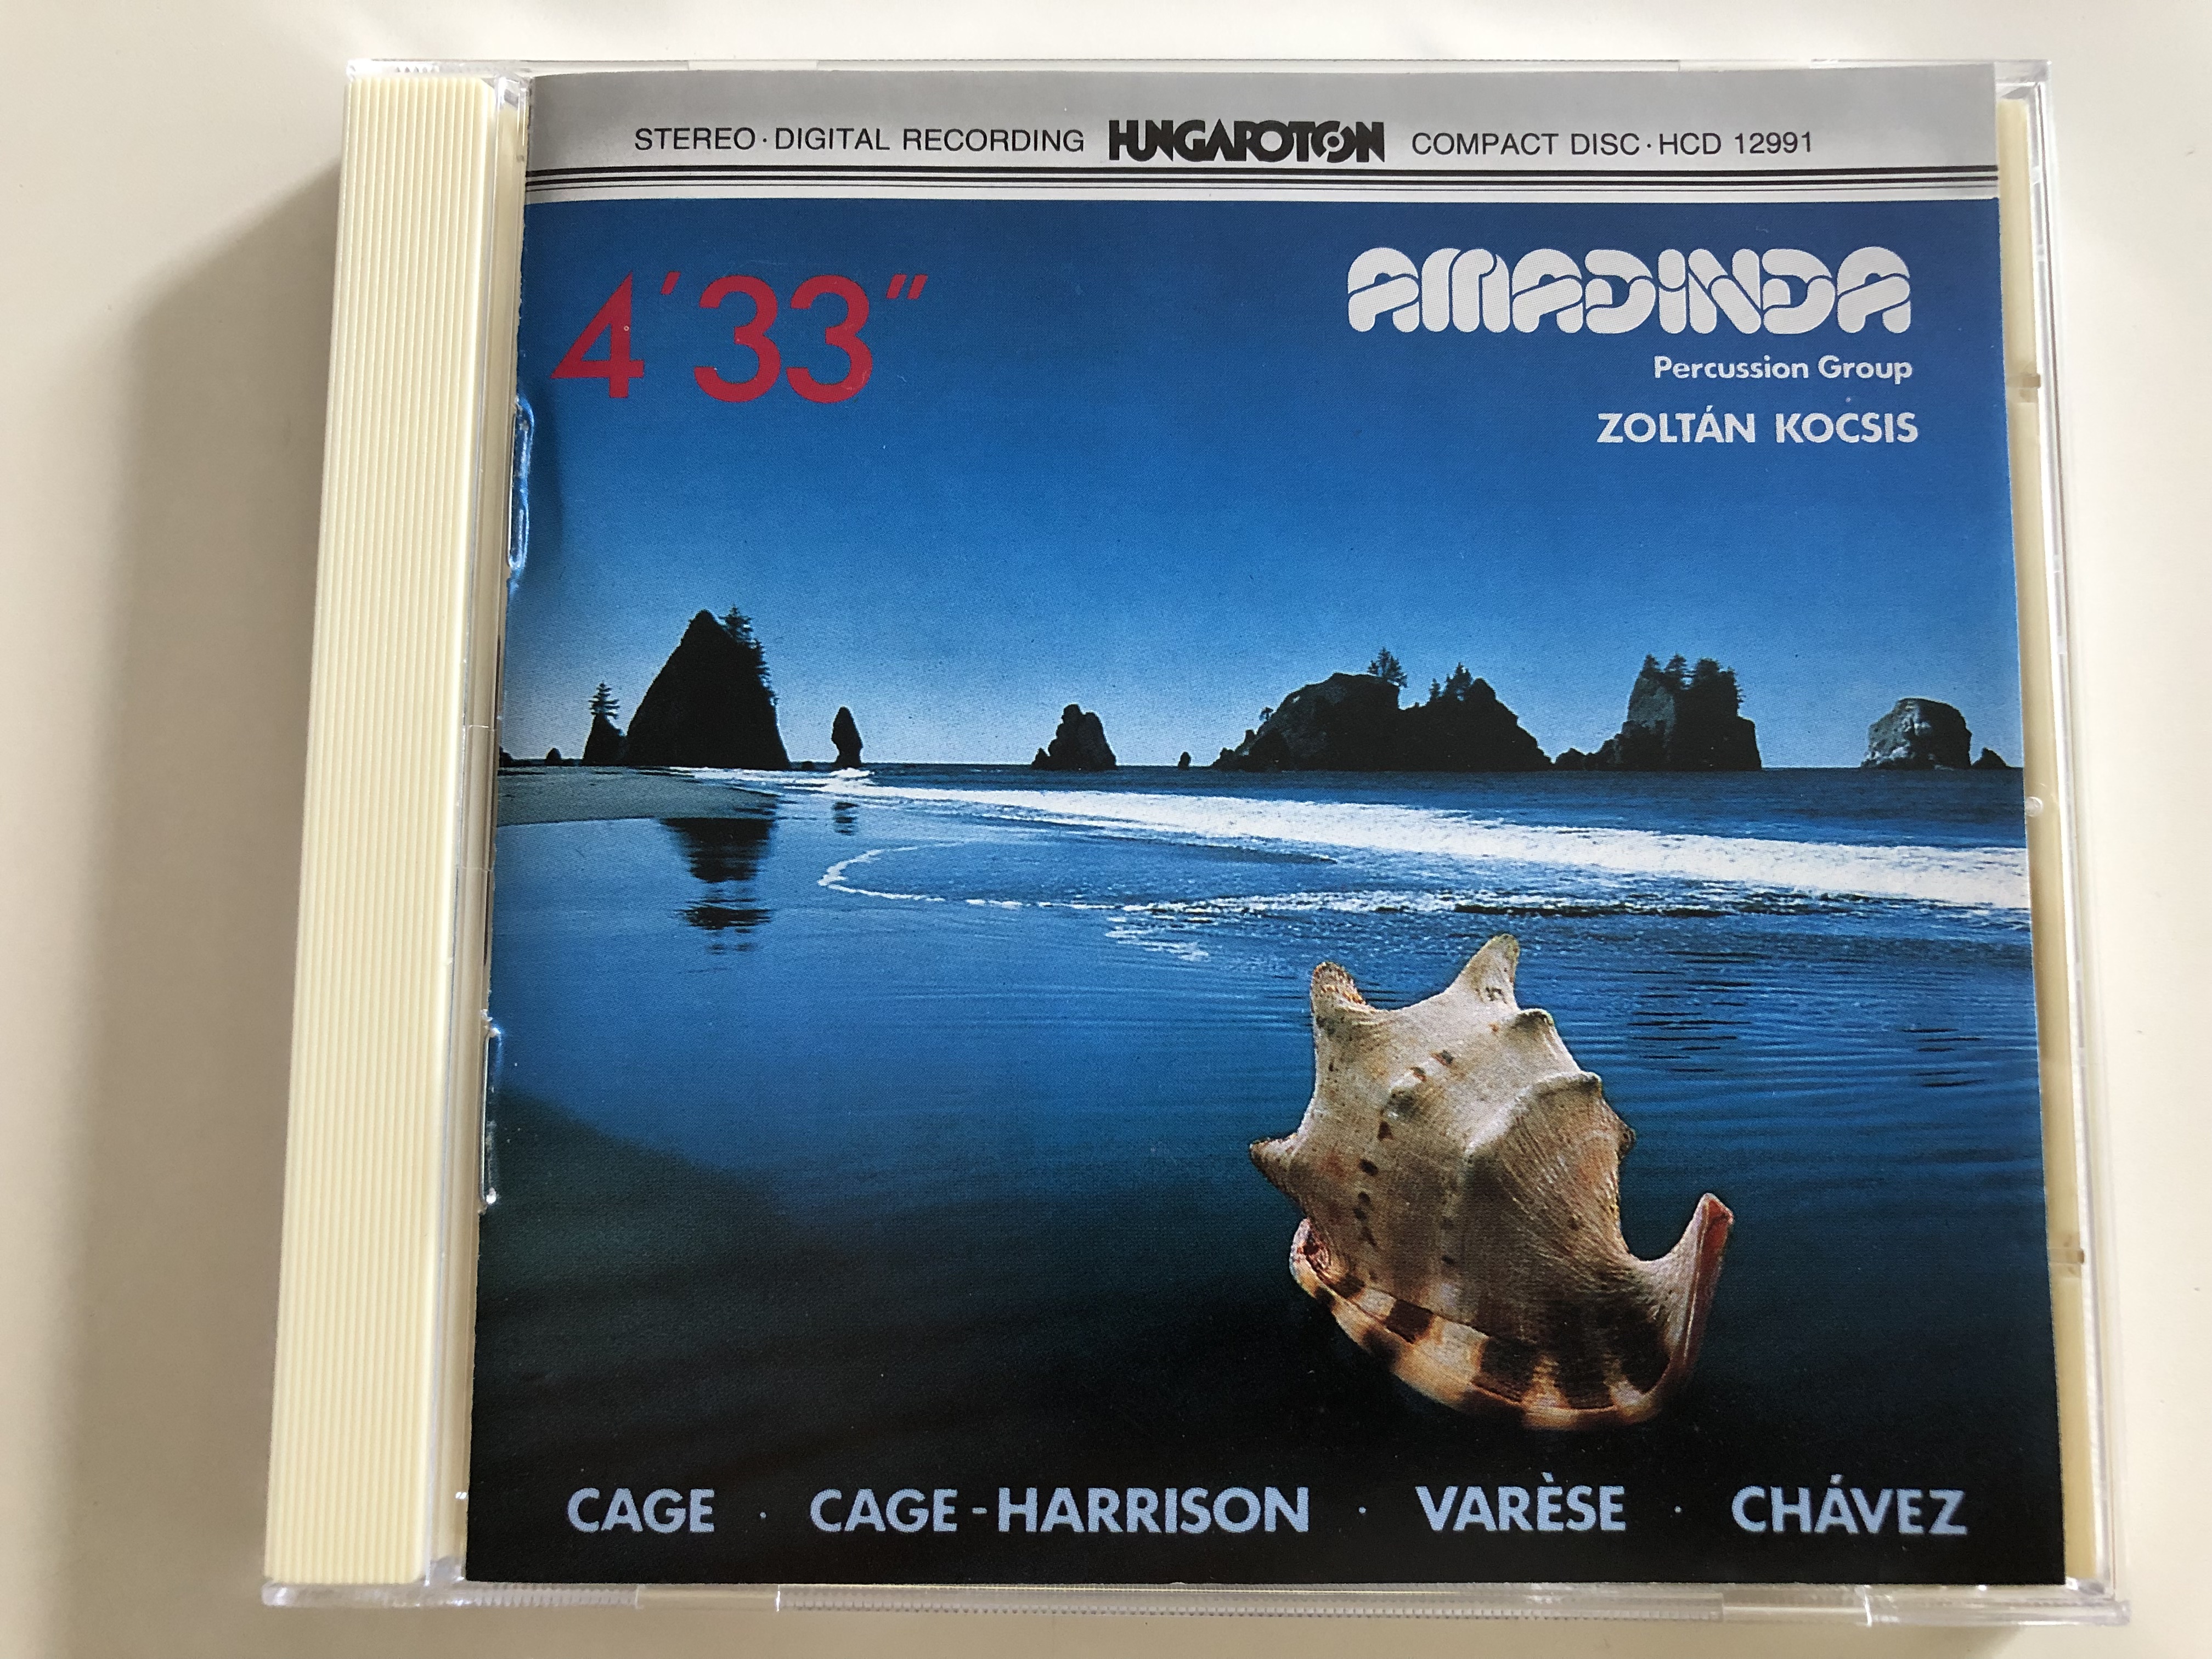 amadinda-percussion-group-works-by-var-se-ch-vez-cage-harrison-with-zolt-n-kocsis-piano-aur-l-holl-benedek-t-th-percussion-hungaroton-hcd-12991-audio-cd-1989-1-.jpg